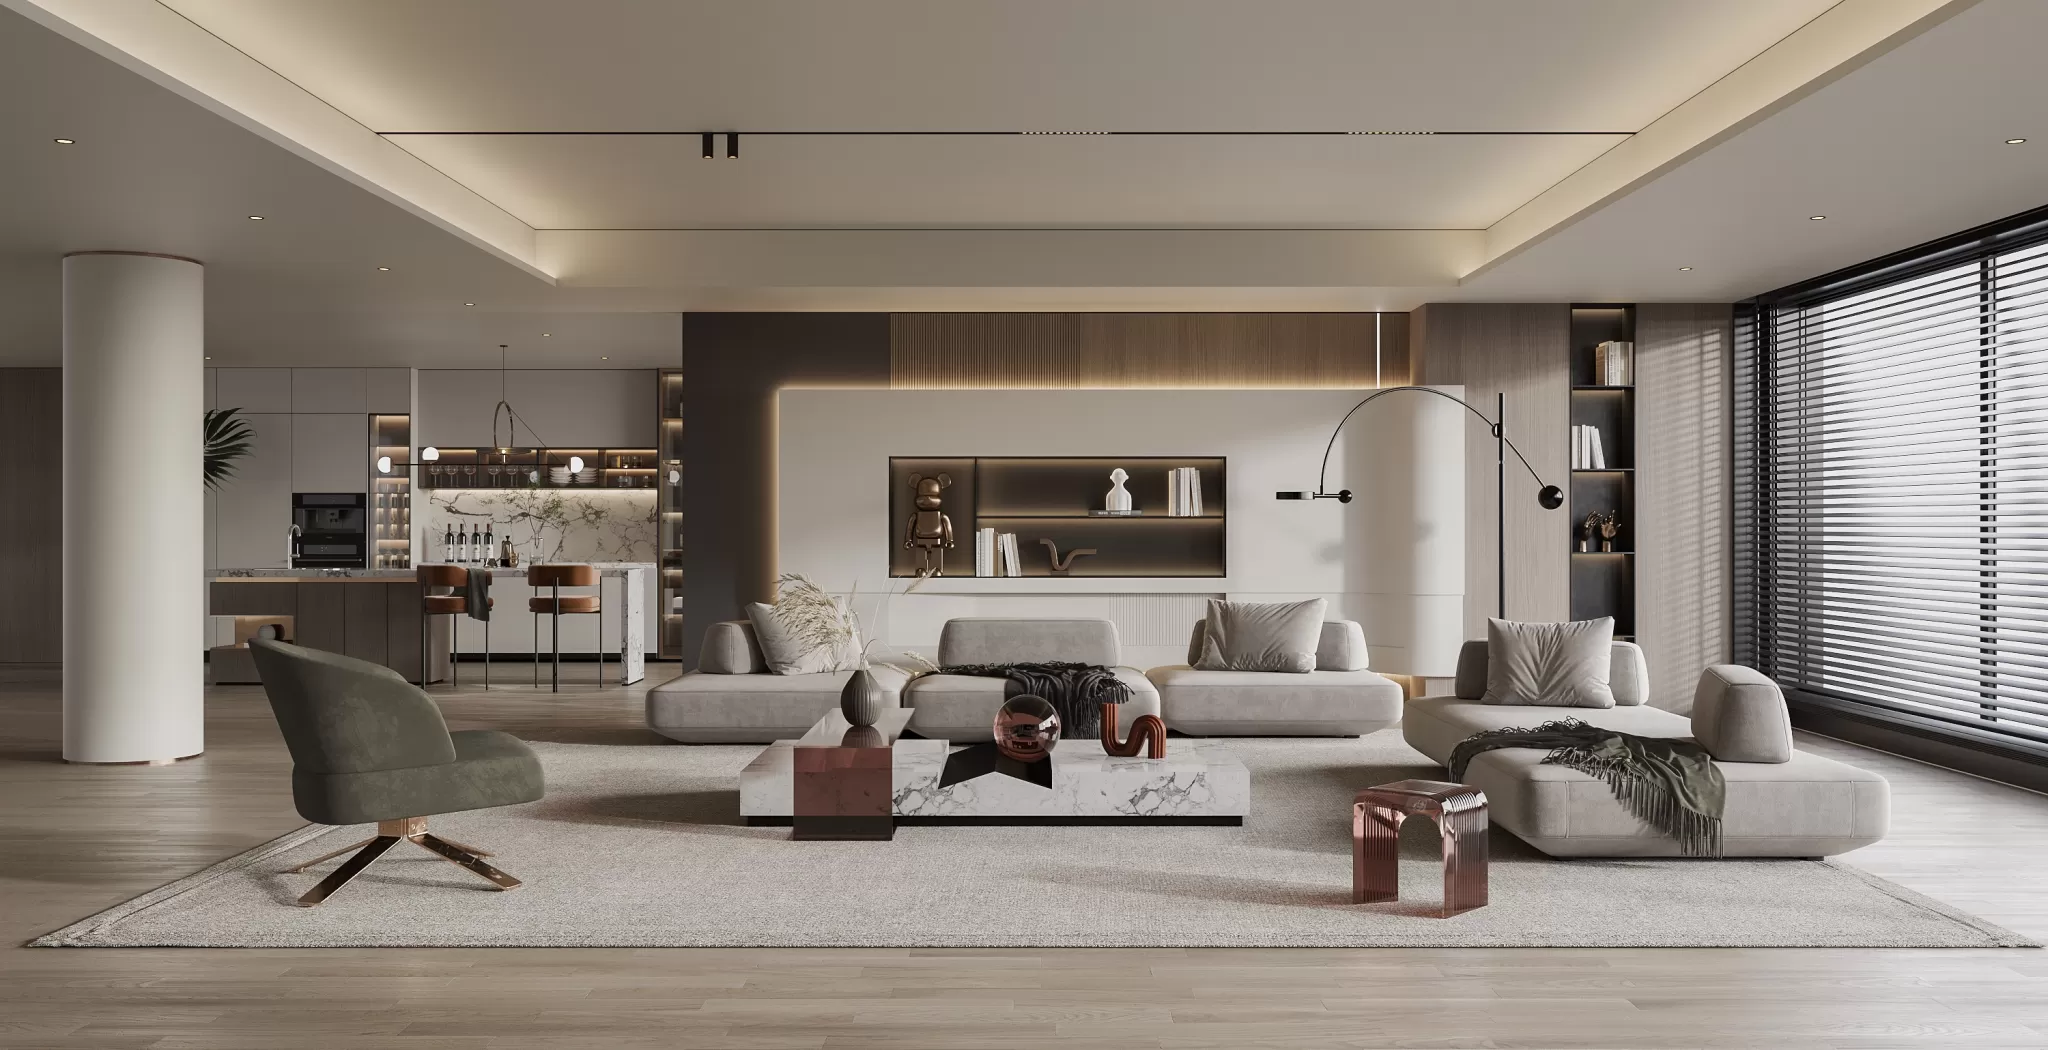 HOUSE SPACE 3D SCENES – LIVING ROOM – 0055